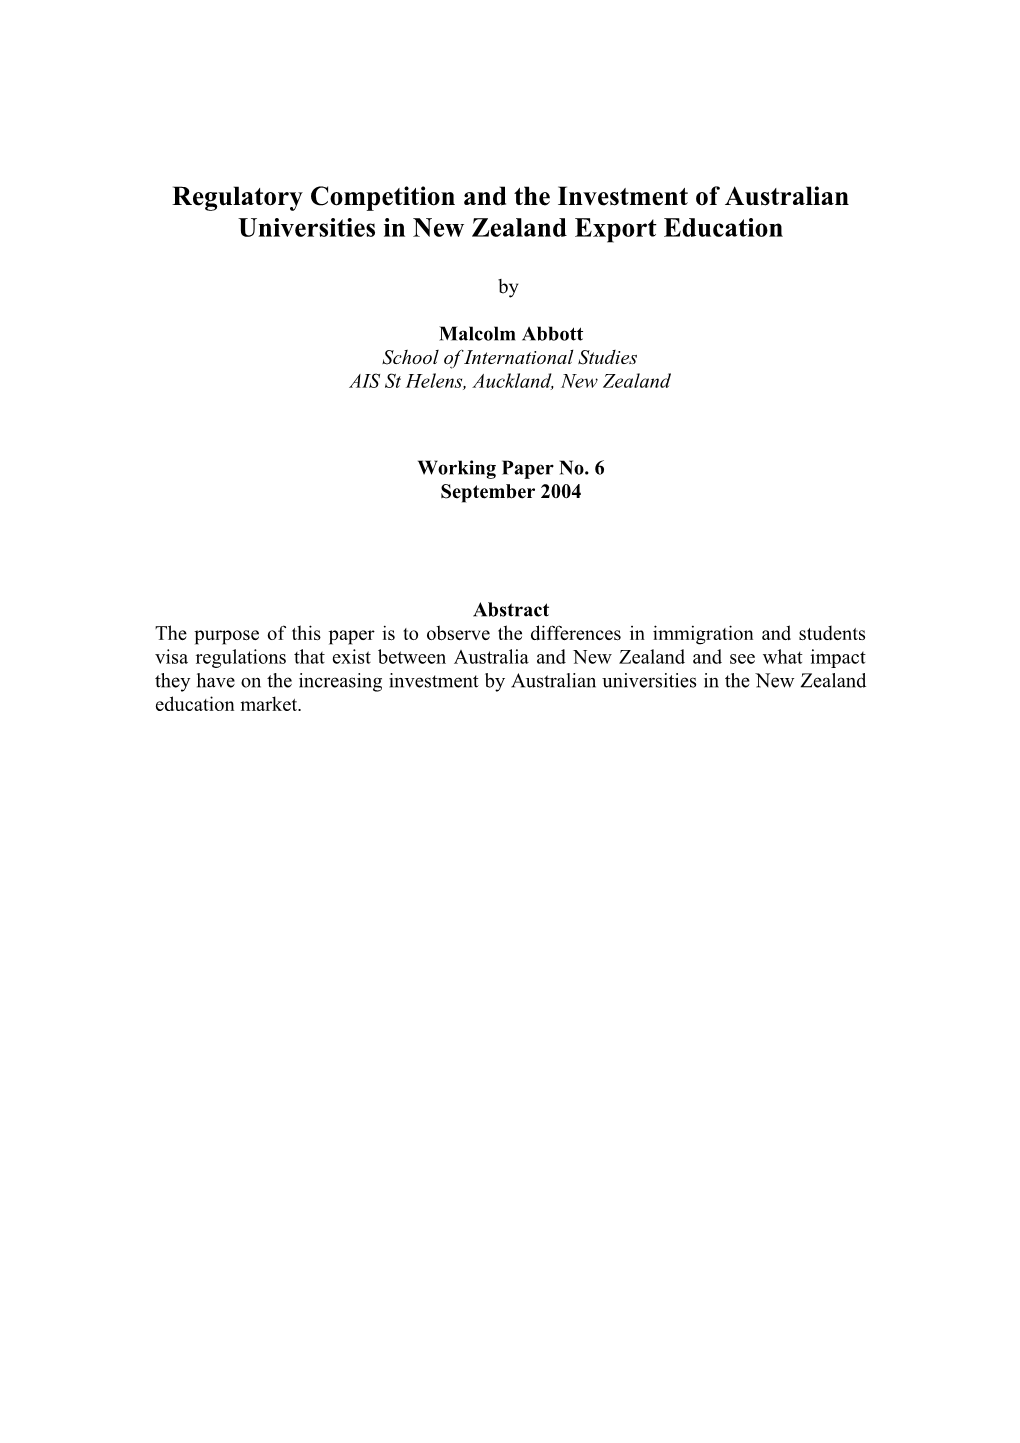 Regulatory Competition and the Investment of Australian Universities in New Zealand Export